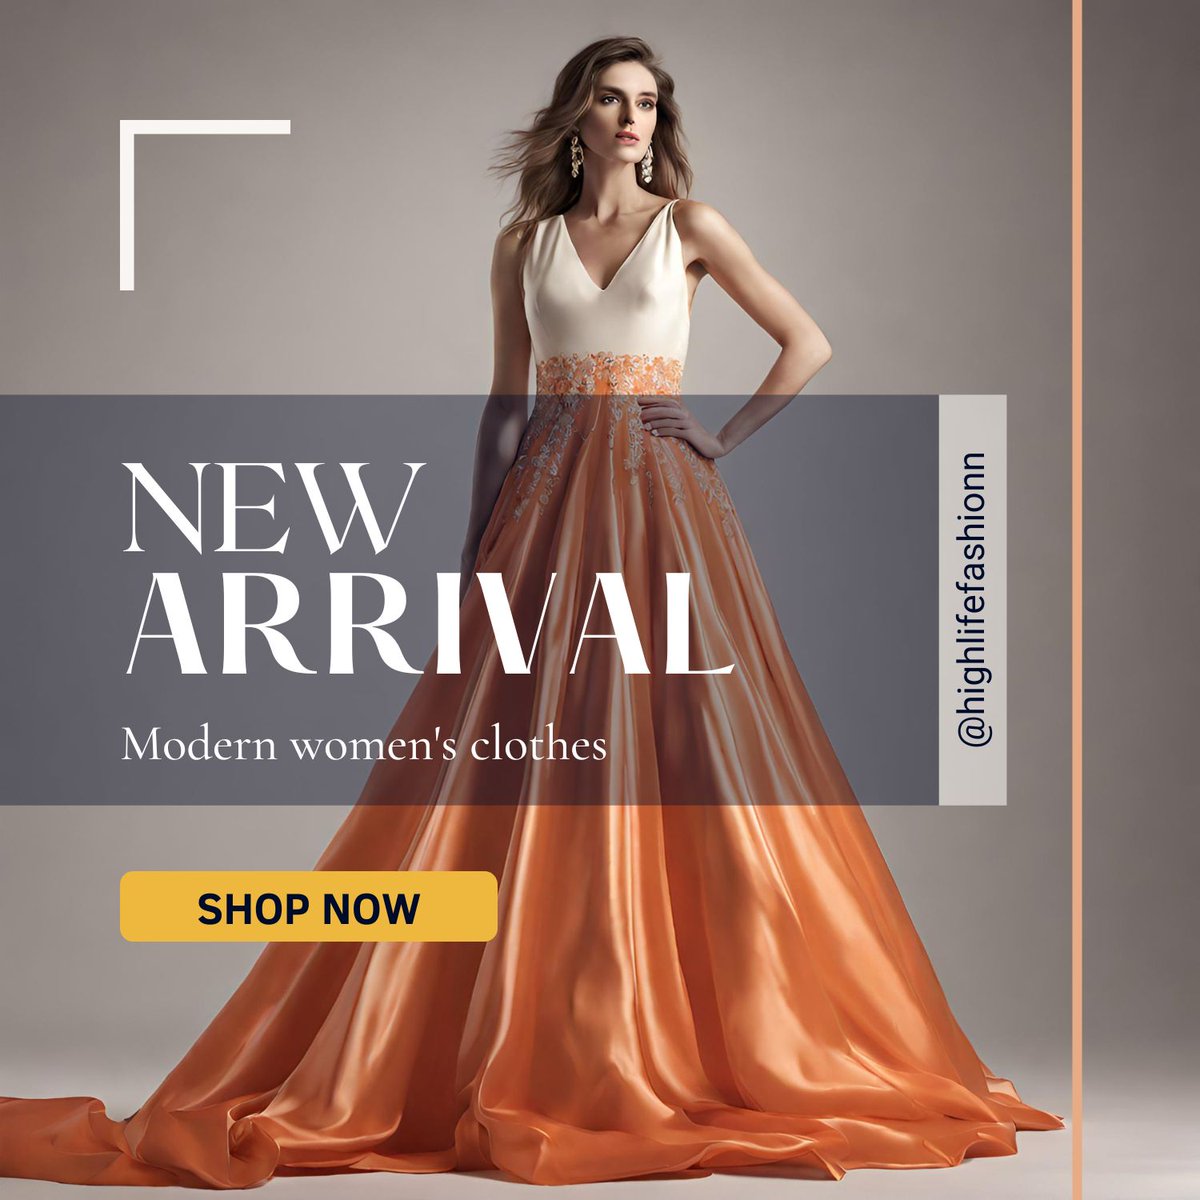 Highlife Fashionn brings you the Latest Discounts Online. Unleash your style without breaking the bank.

Click: highlifefashionn.com

#womenfashion #womenfashionwear #womenfashions #womenfashıon #womenfashionpost #womenfashionstyle #womenfashionpower